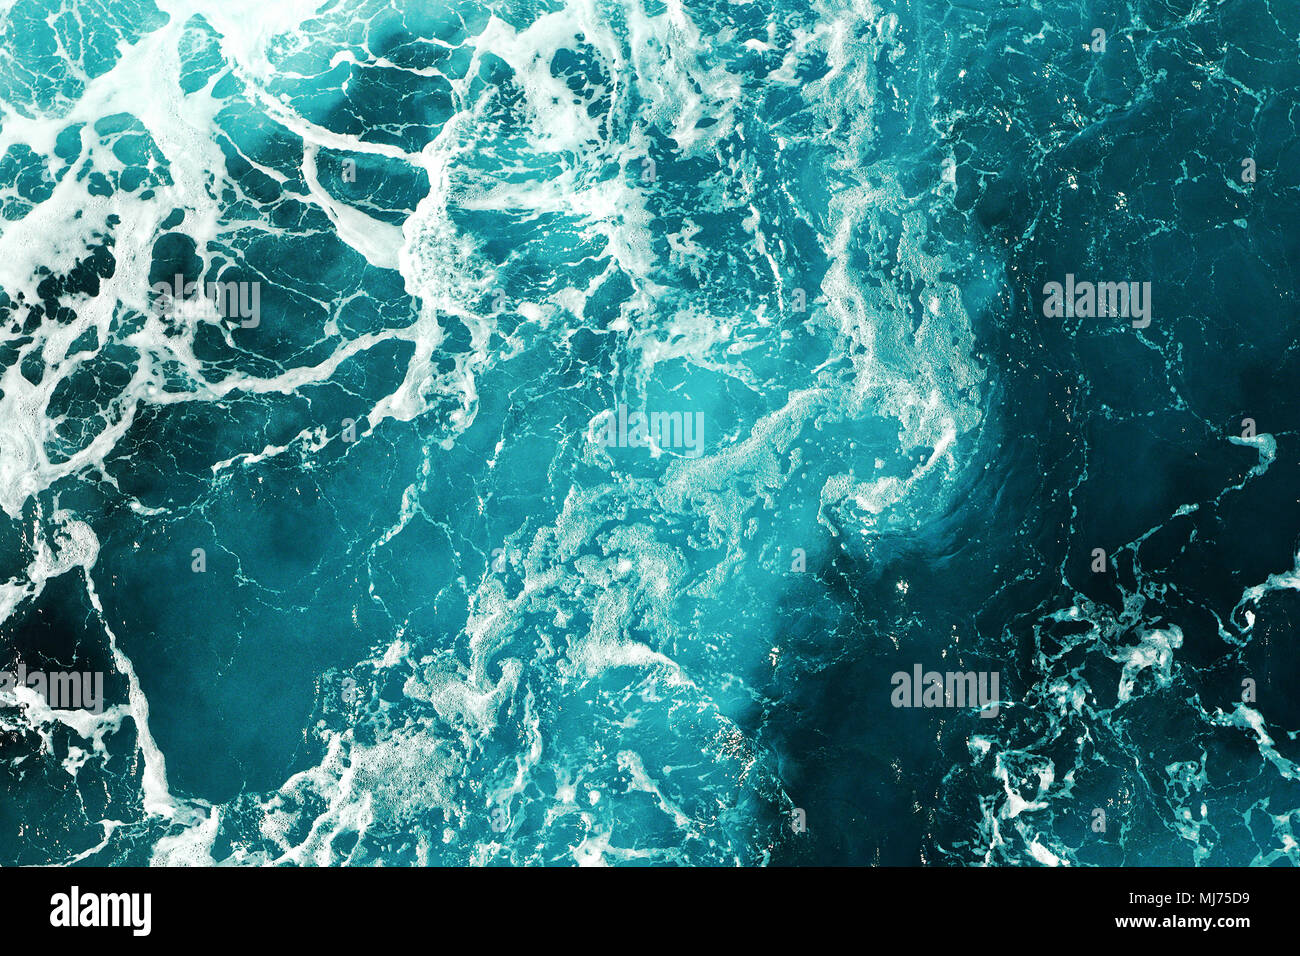 blue sea water texture, natural pattern of waves Stock Photo